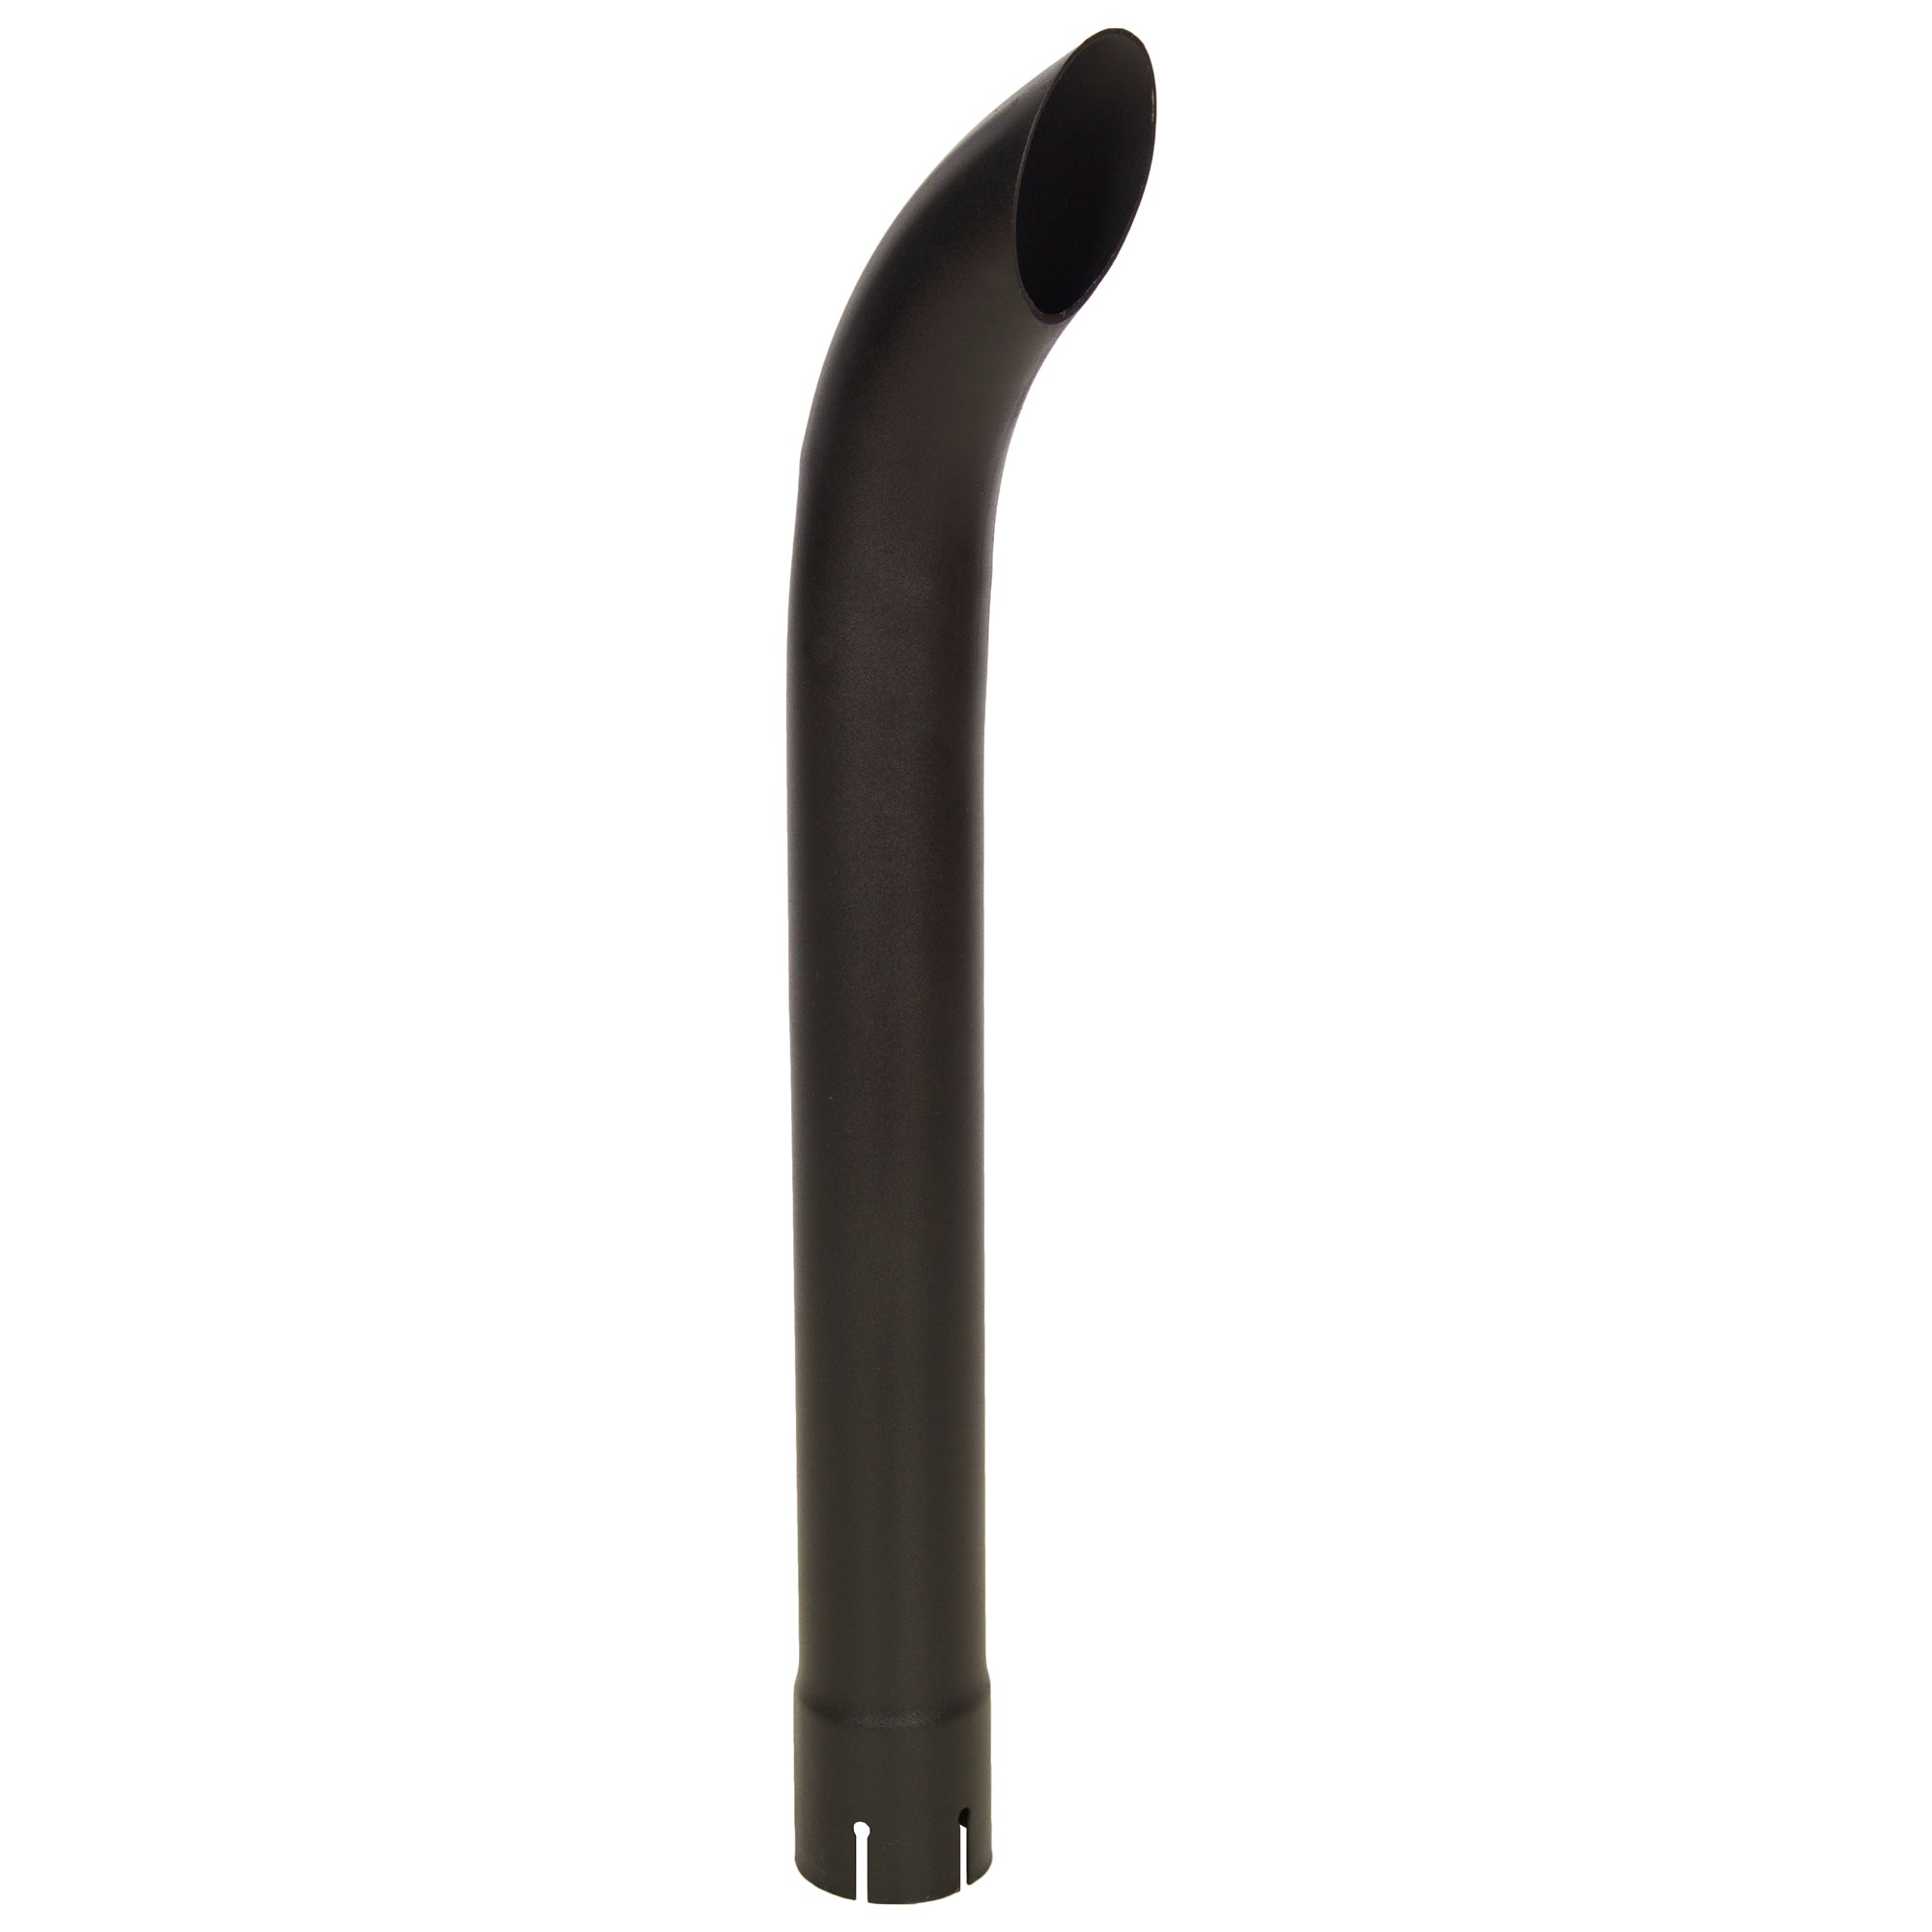 Exhaust Pipe Stack Replacement UNIVERSAL - 2 3/8" x 24" Curved Black